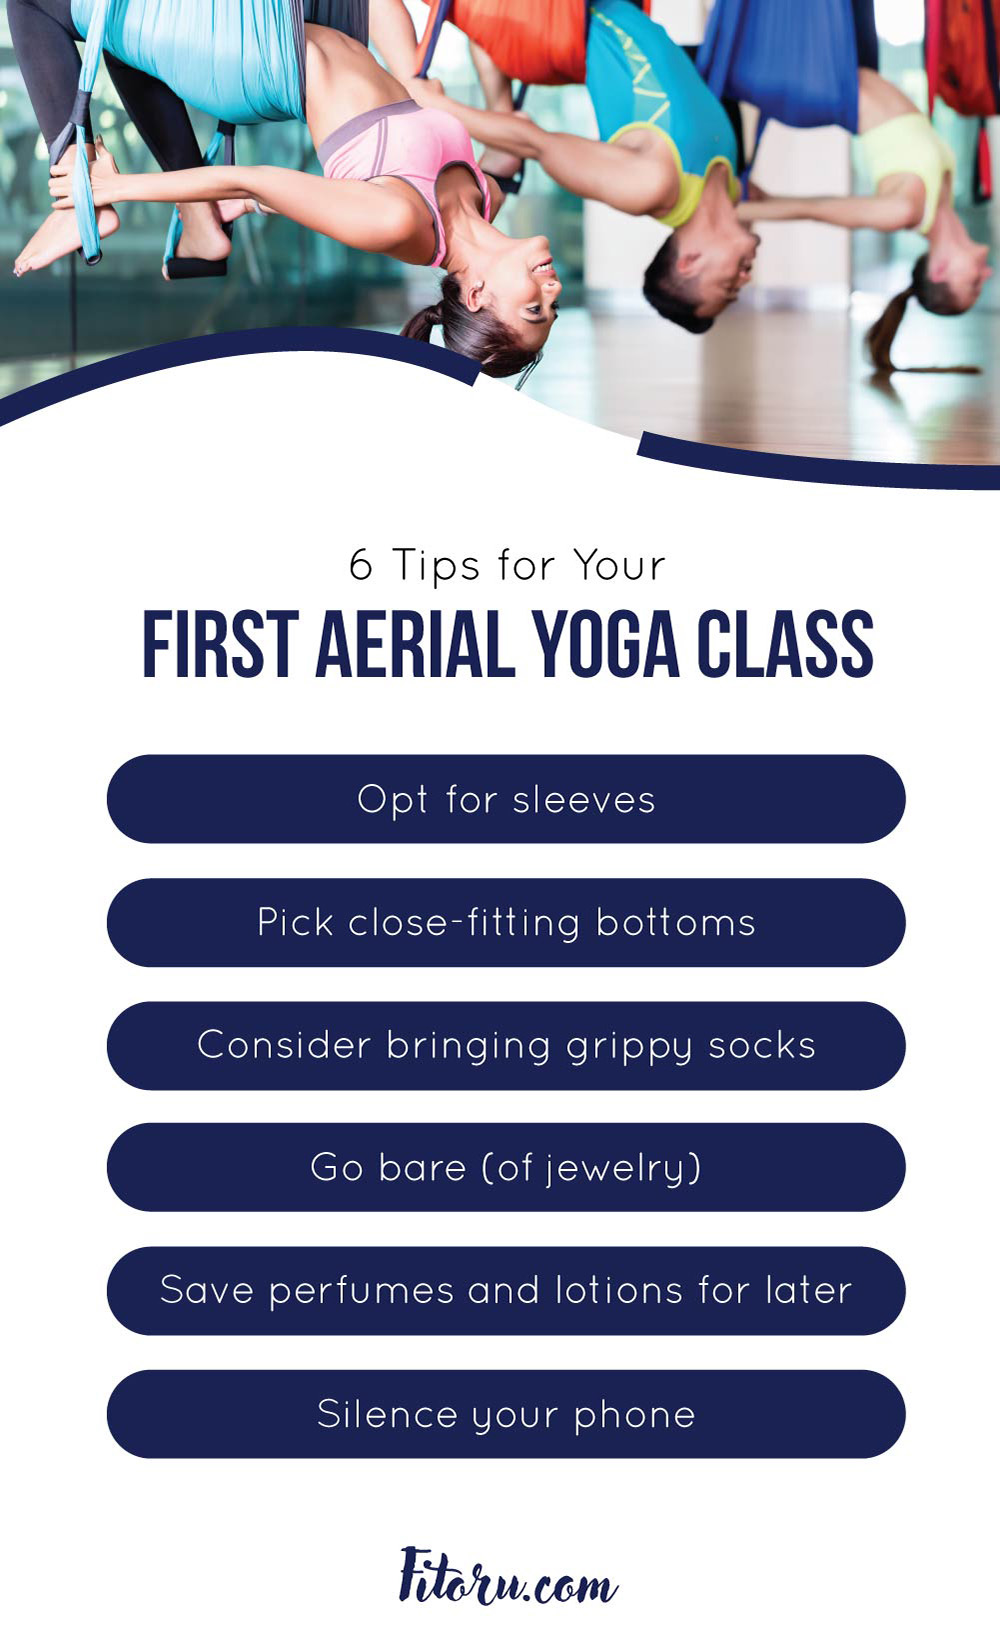 The answer to what aerial yoga is good for and other FAQs.